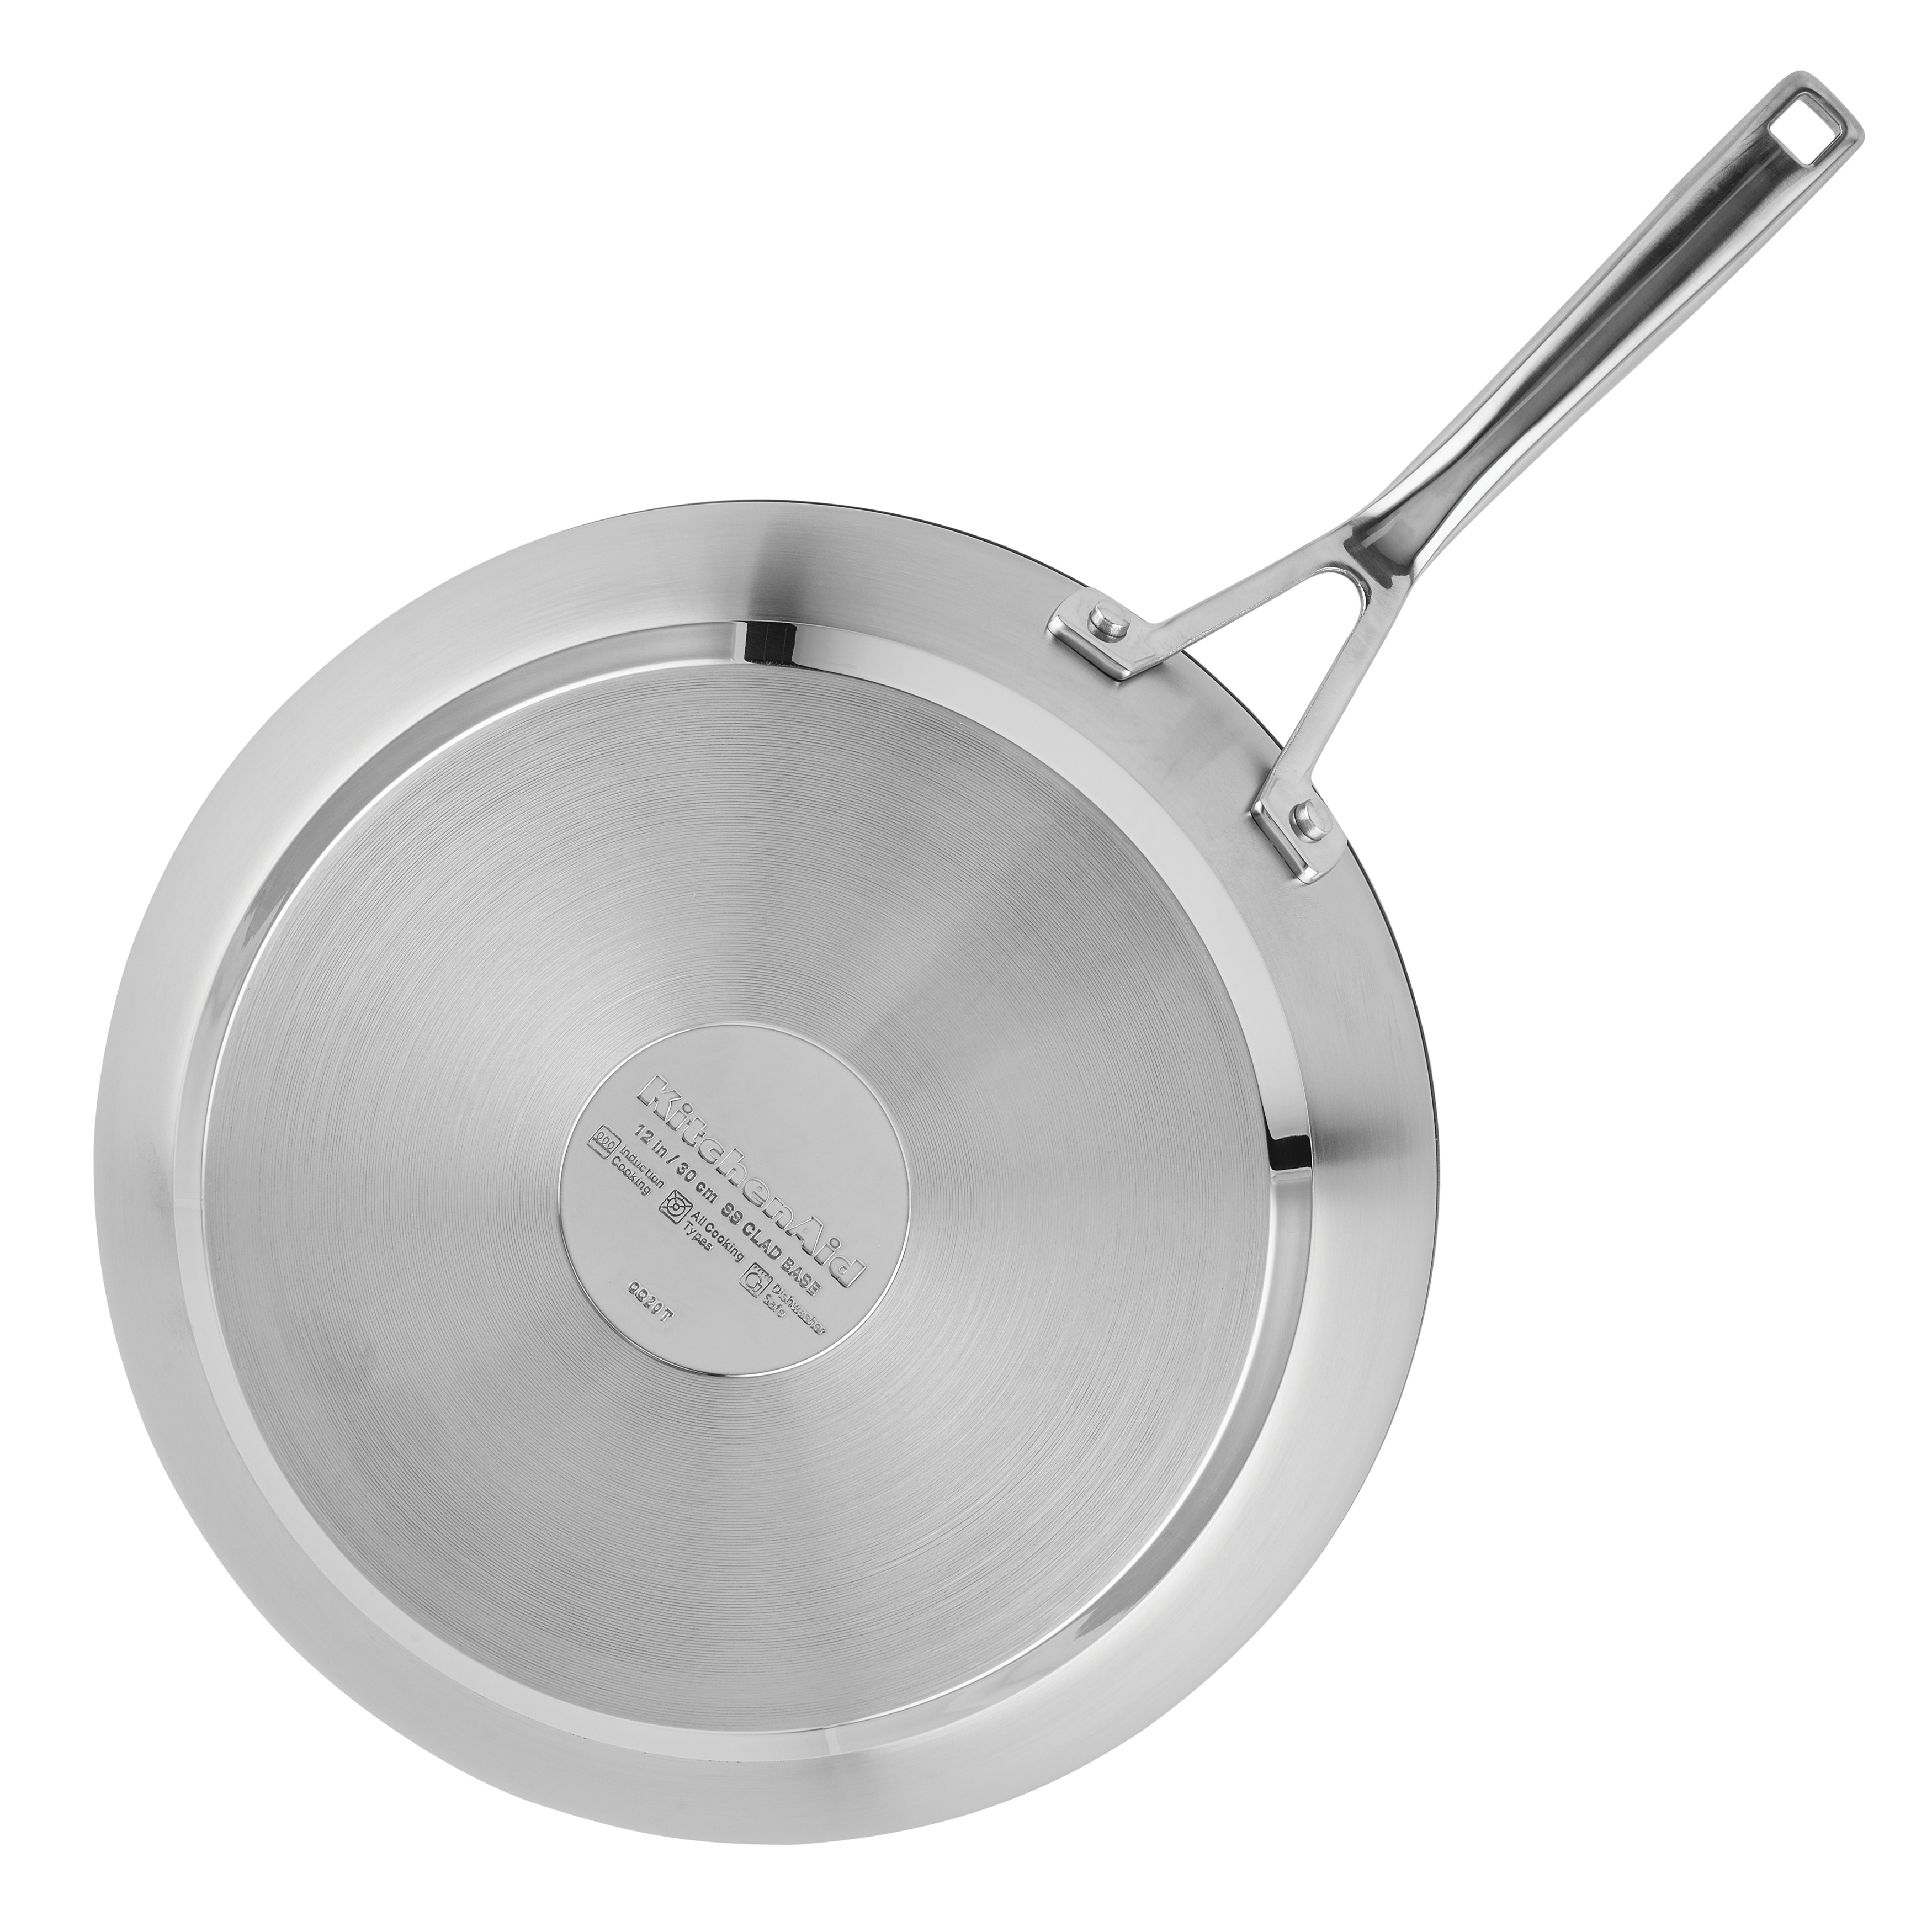 https://ak1.ostkcdn.com/images/products/is/images/direct/bfe8a6b8385f8f443ccb3060521d2265bd396fd9/KitchenAid-3-Ply-Base-Stainless-Steel-Nonstick-Induction-Frying-Pan%2C-12-Inch%2C-Brushed-Stainless-Steel.jpg